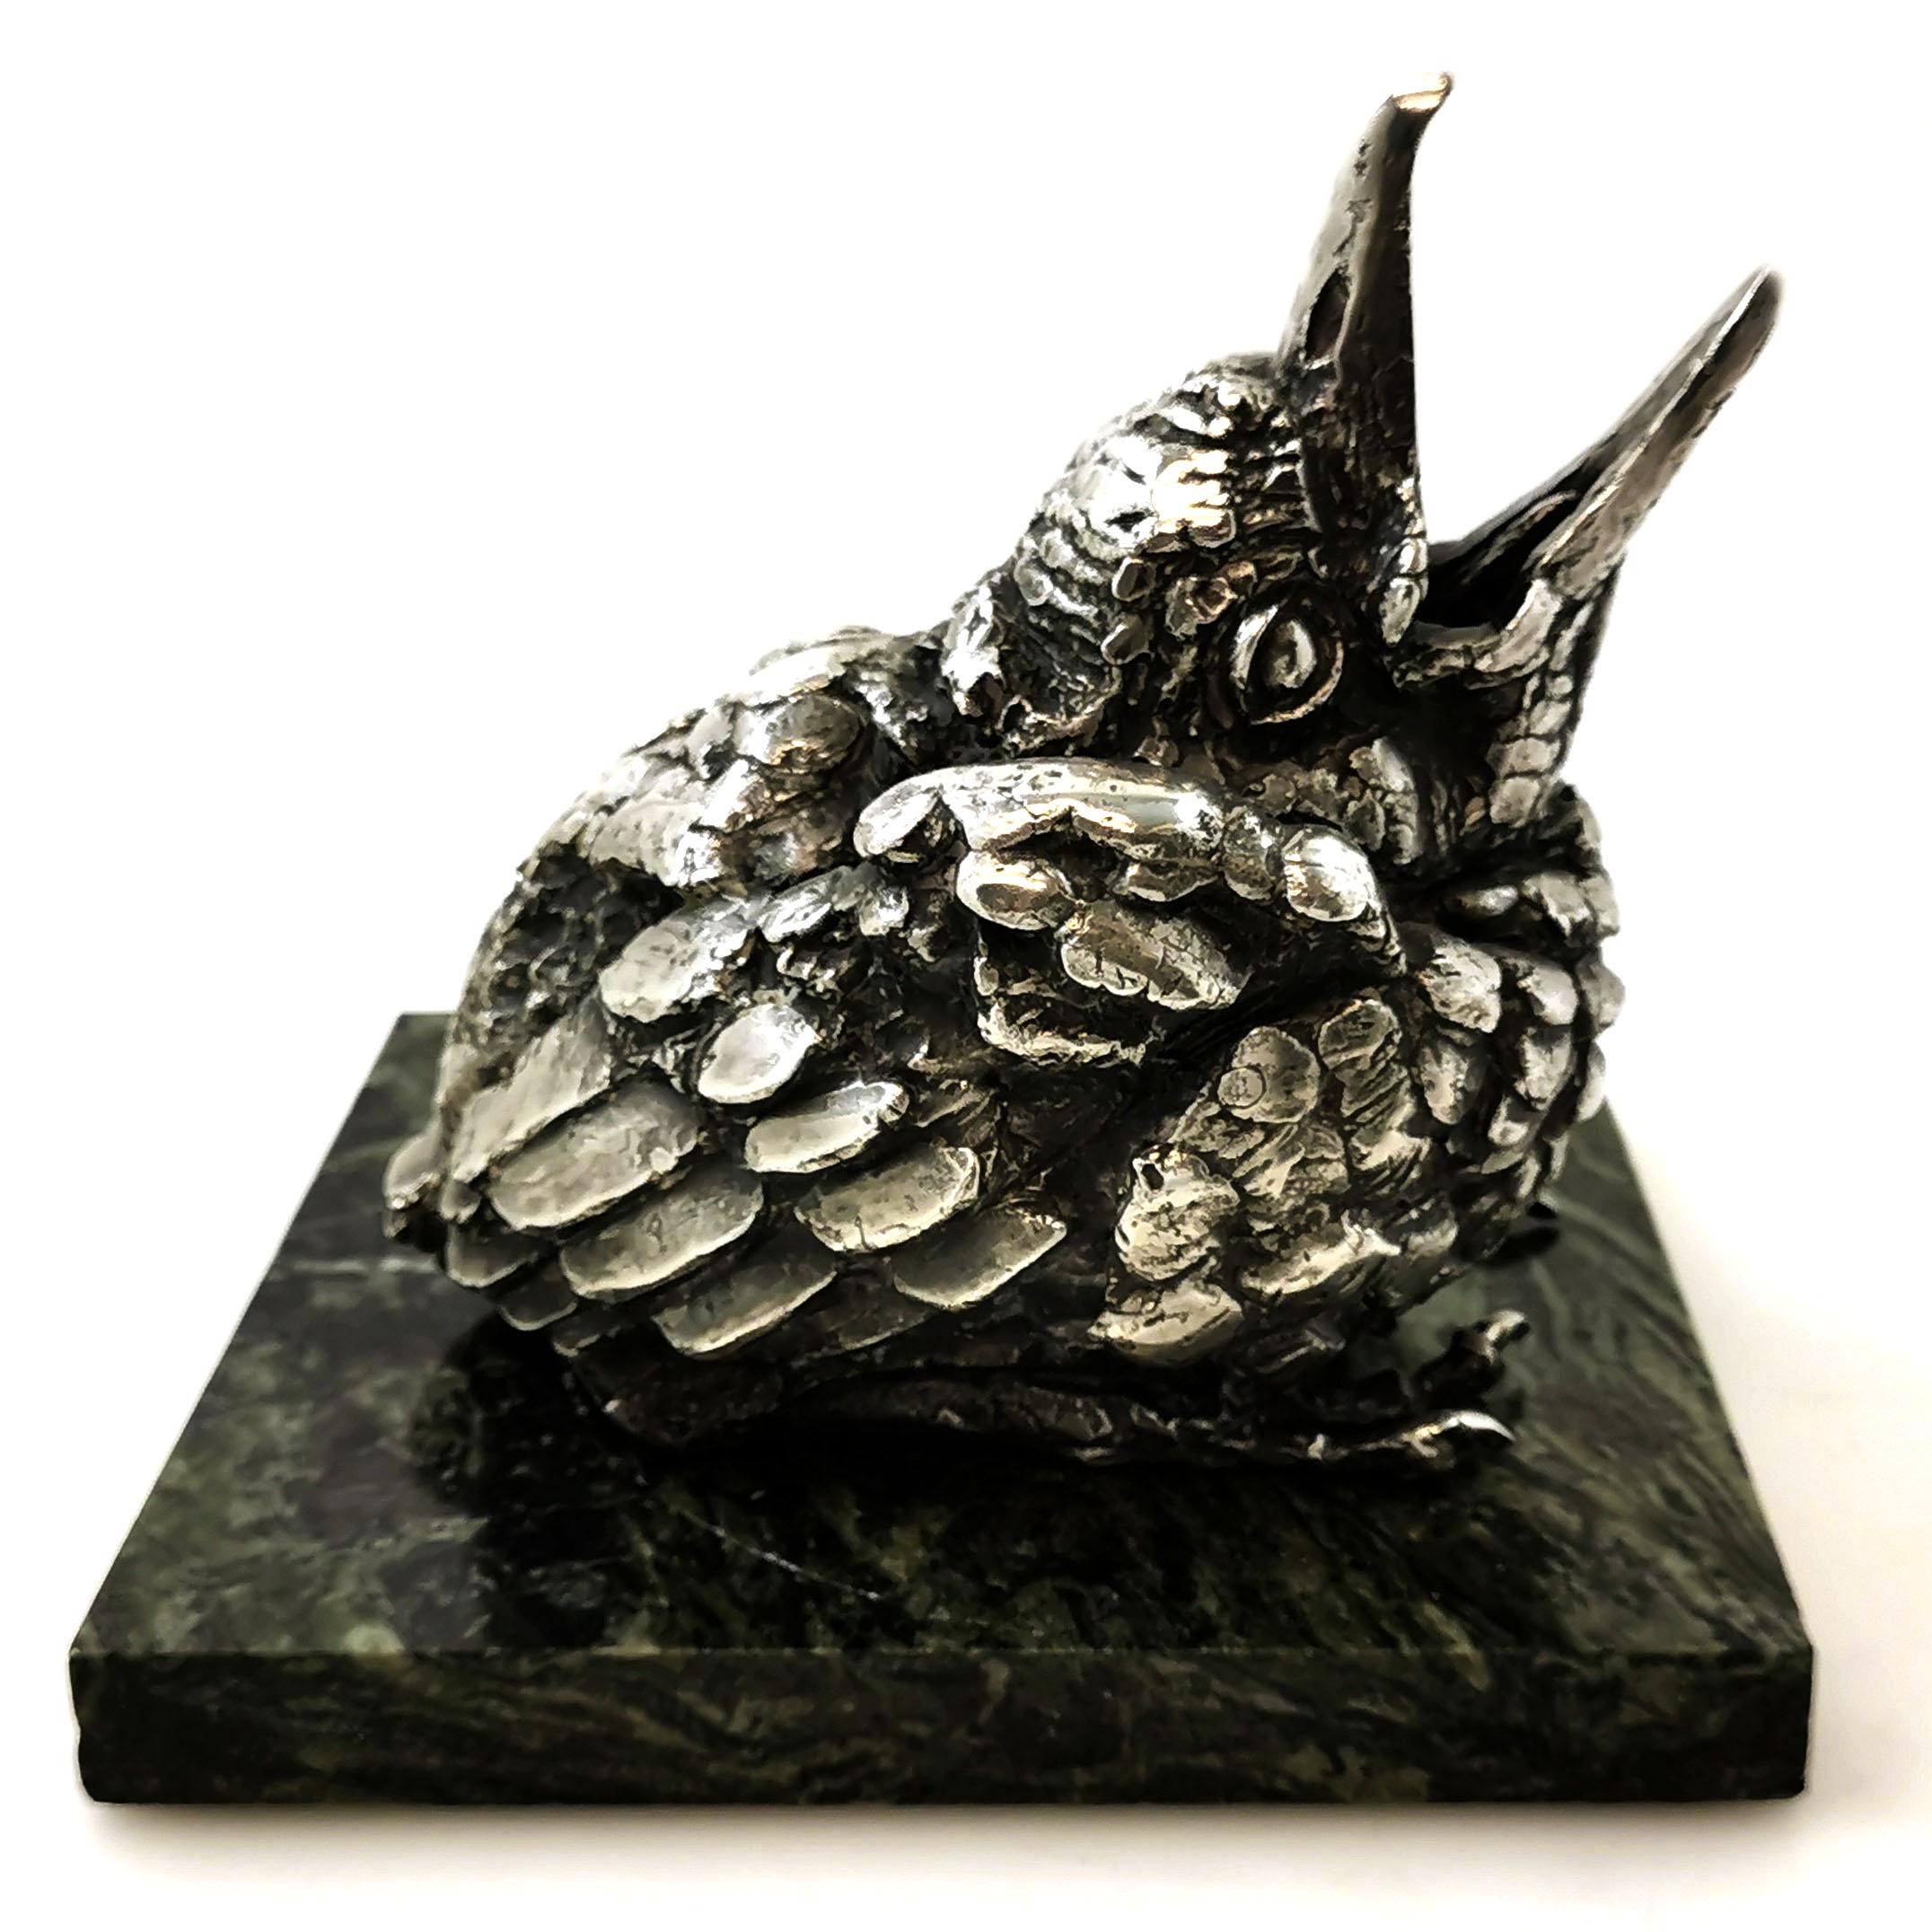 A magnificent sterling Silver Sculpture of a Fledgling Blackbird by sculptor Sally Arnup presented on a green marble base.

Made in Sheffield in 1975 by Sally Arnup FRBS, ARCA (1930-2015).

Approx. Weight (Silver Only) - 5998g / 192.86oz
Approx.